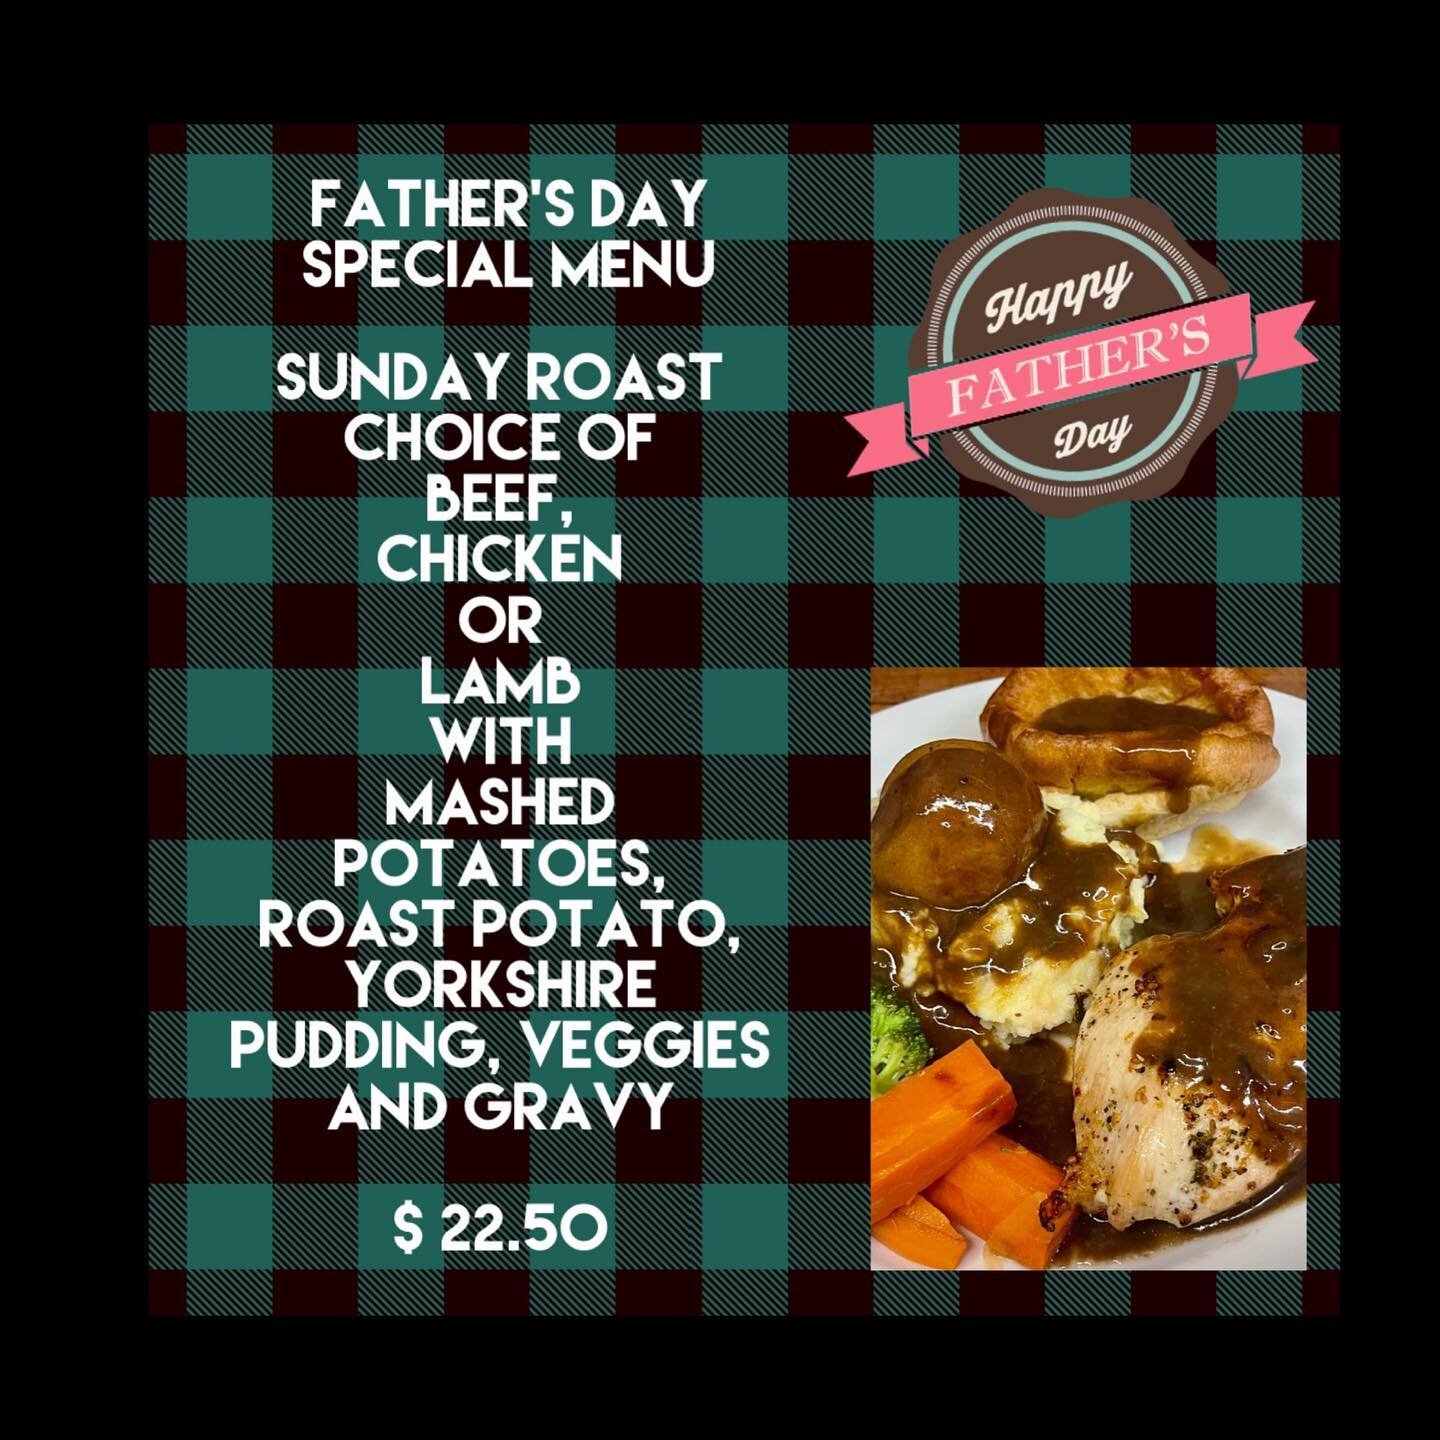 FATHER&rsquo;S DAY MENU! 🏆👑
In addition to our regular menu, we will offer a Special Father&rsquo;s Day menu this Sunday, June 18!

Sunday Roast
Choice of :
Beef, 
Chicken 
Or
Lamb 
Served with:
Mashed potatoes, roast potato, Yorkshire pudding, veg